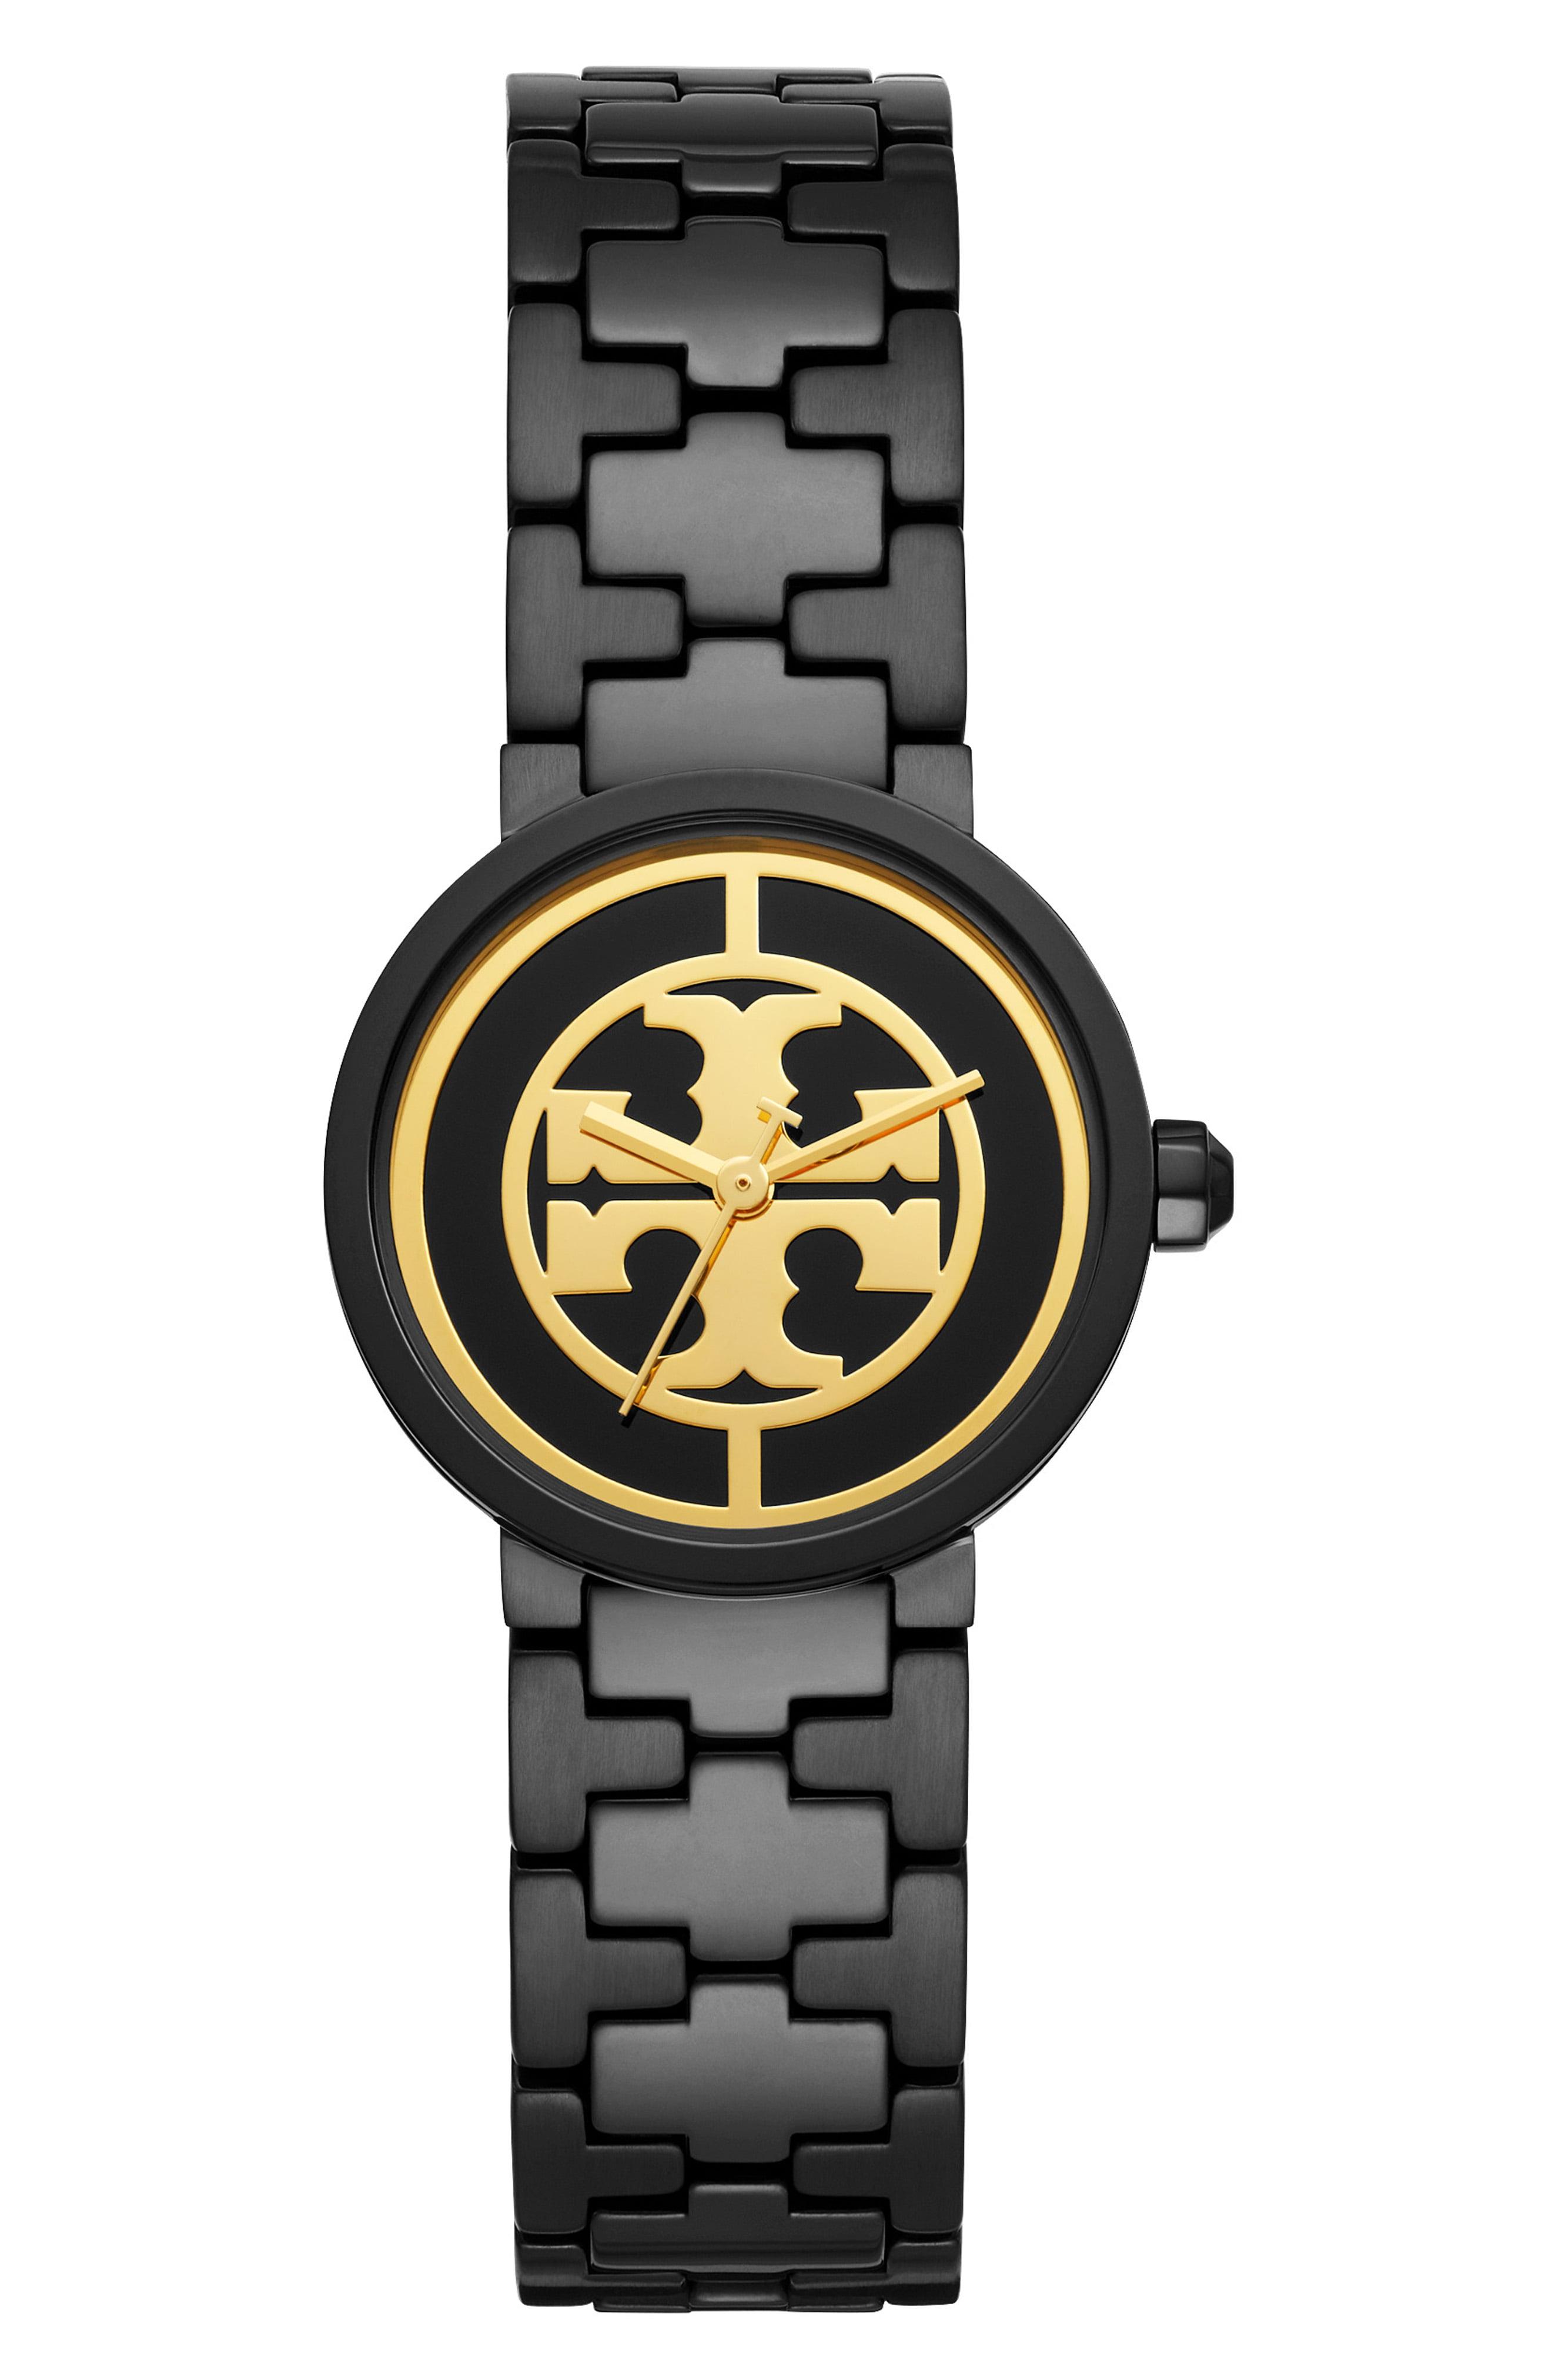 Tory Burch Watch Gold | escapeauthority.com